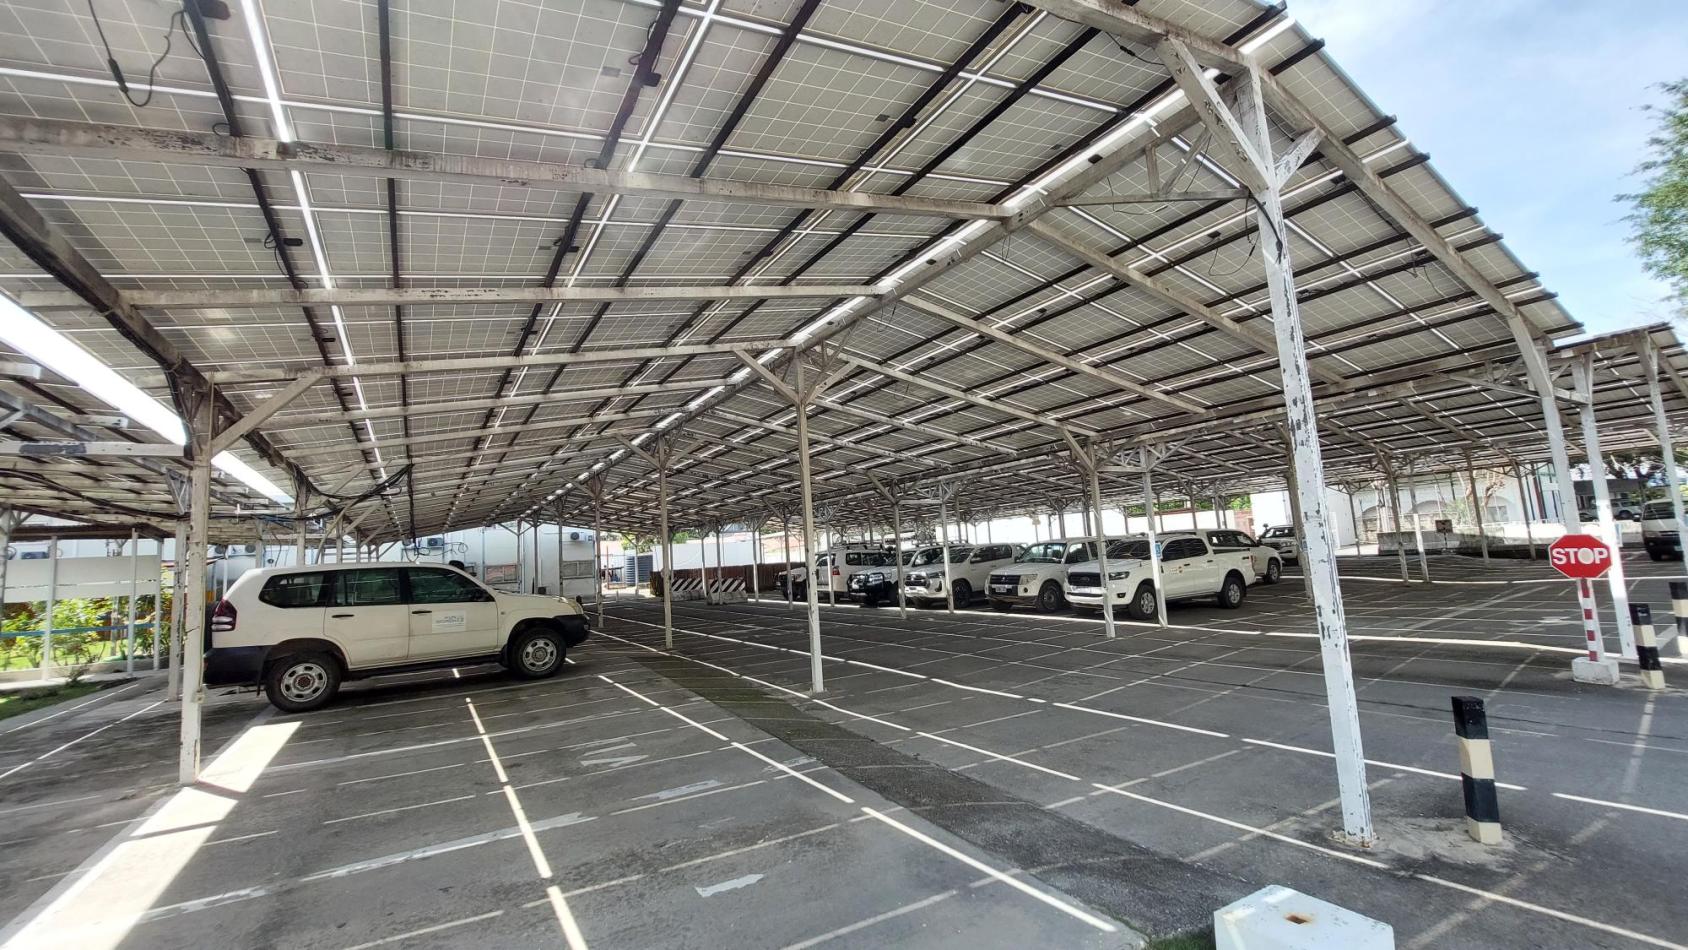 Large car park with solar panels above and vehicles parked within